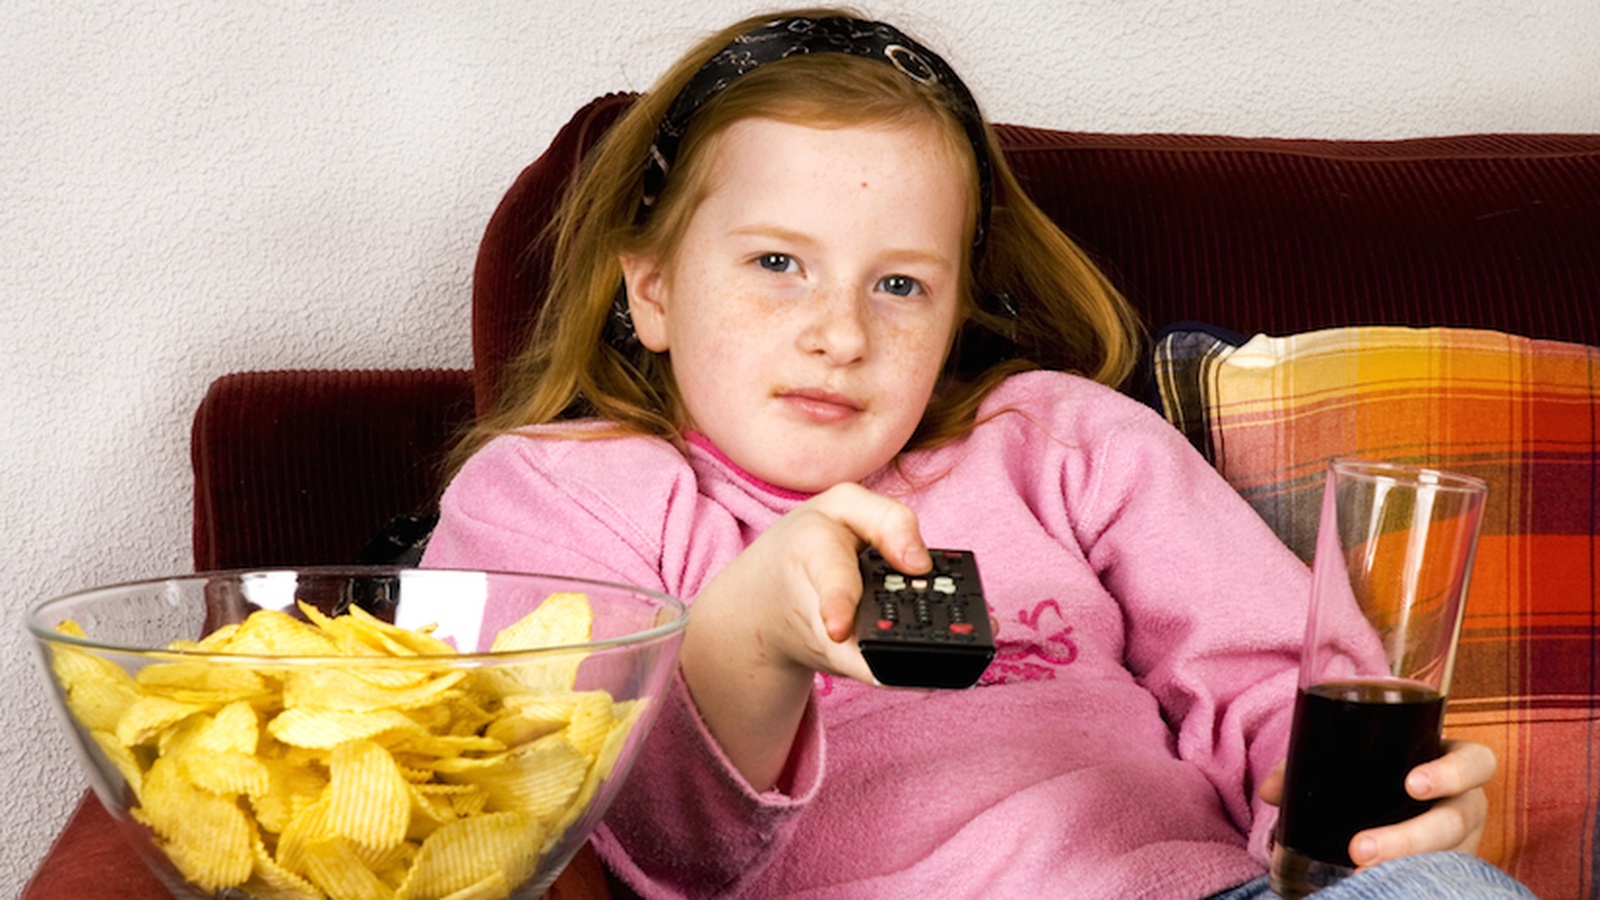 Is Advertising Making Your Kids Fat and Sick?